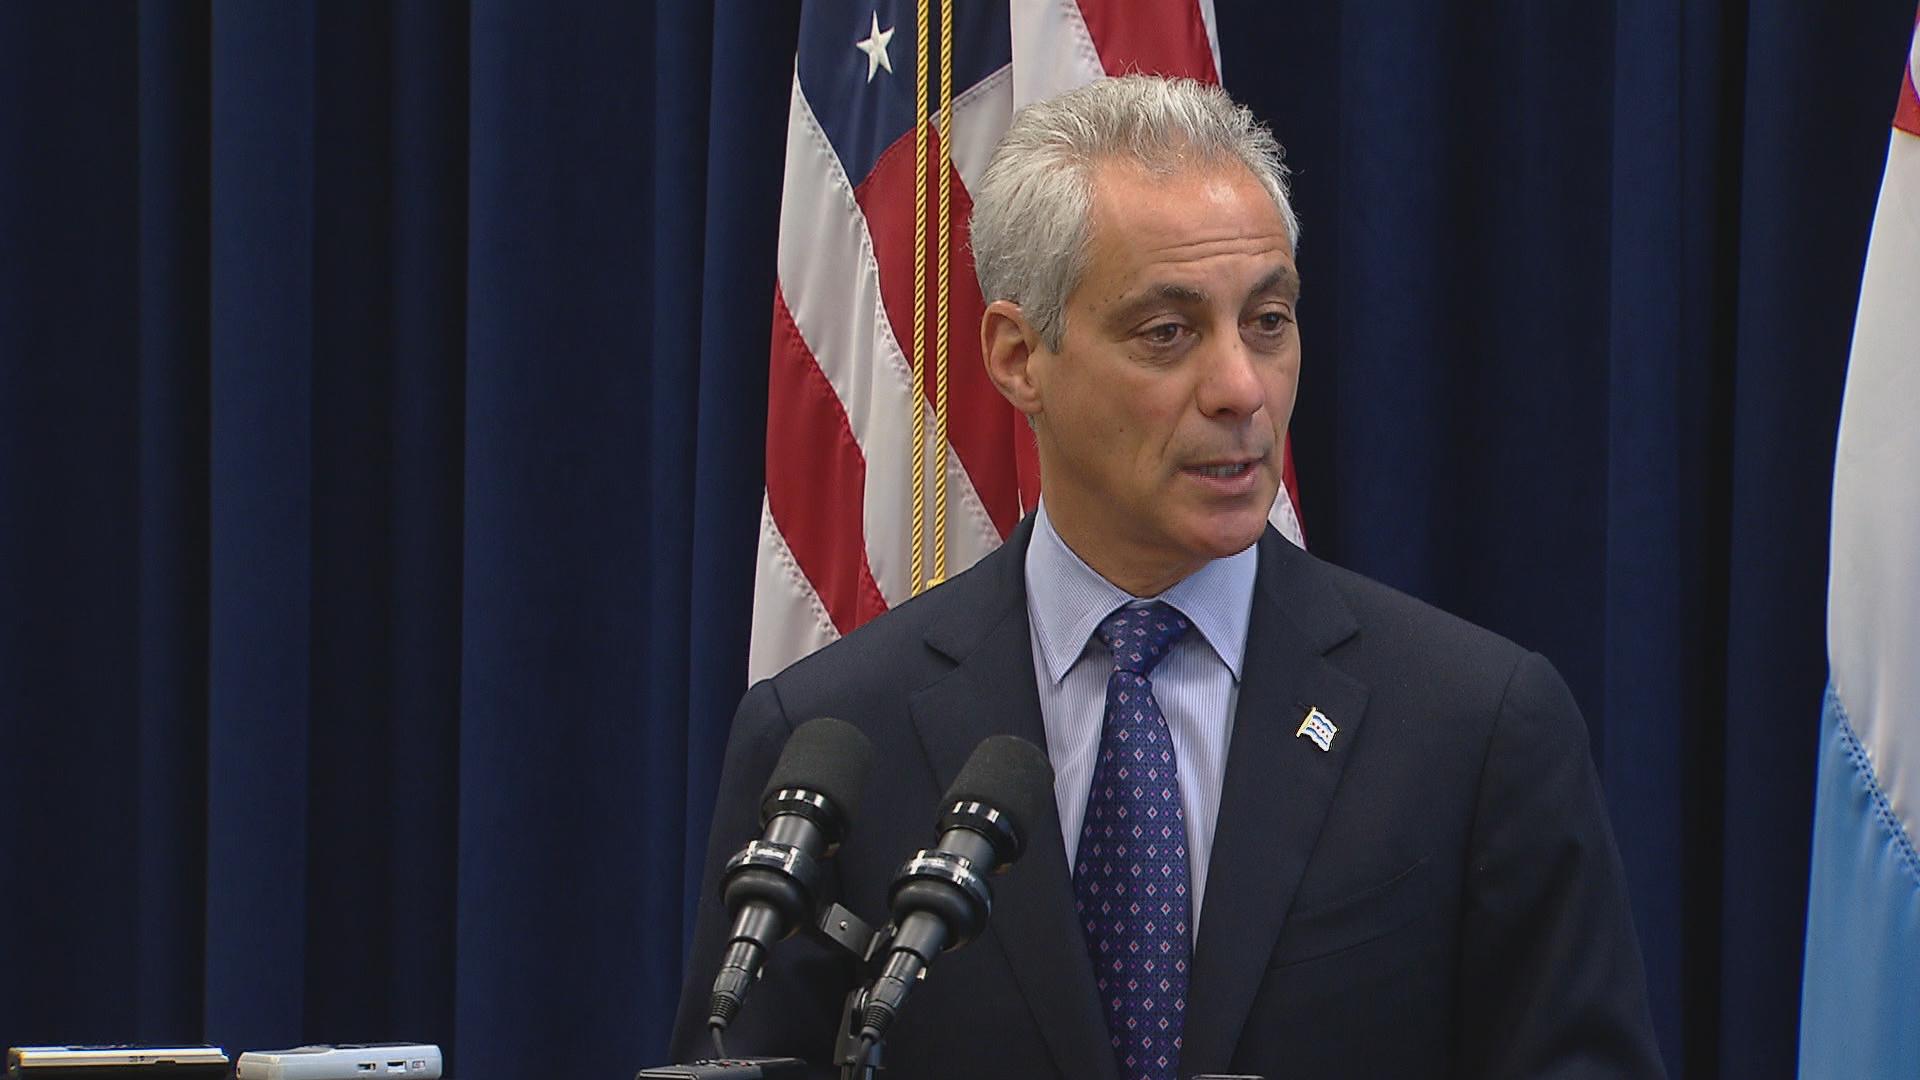 Mayor Rahm Emanuel: “This has been a request of the transgender community and we’re going to make the changes to reflect our values, and to make sure there is no discrimination in the city of Chicago.”